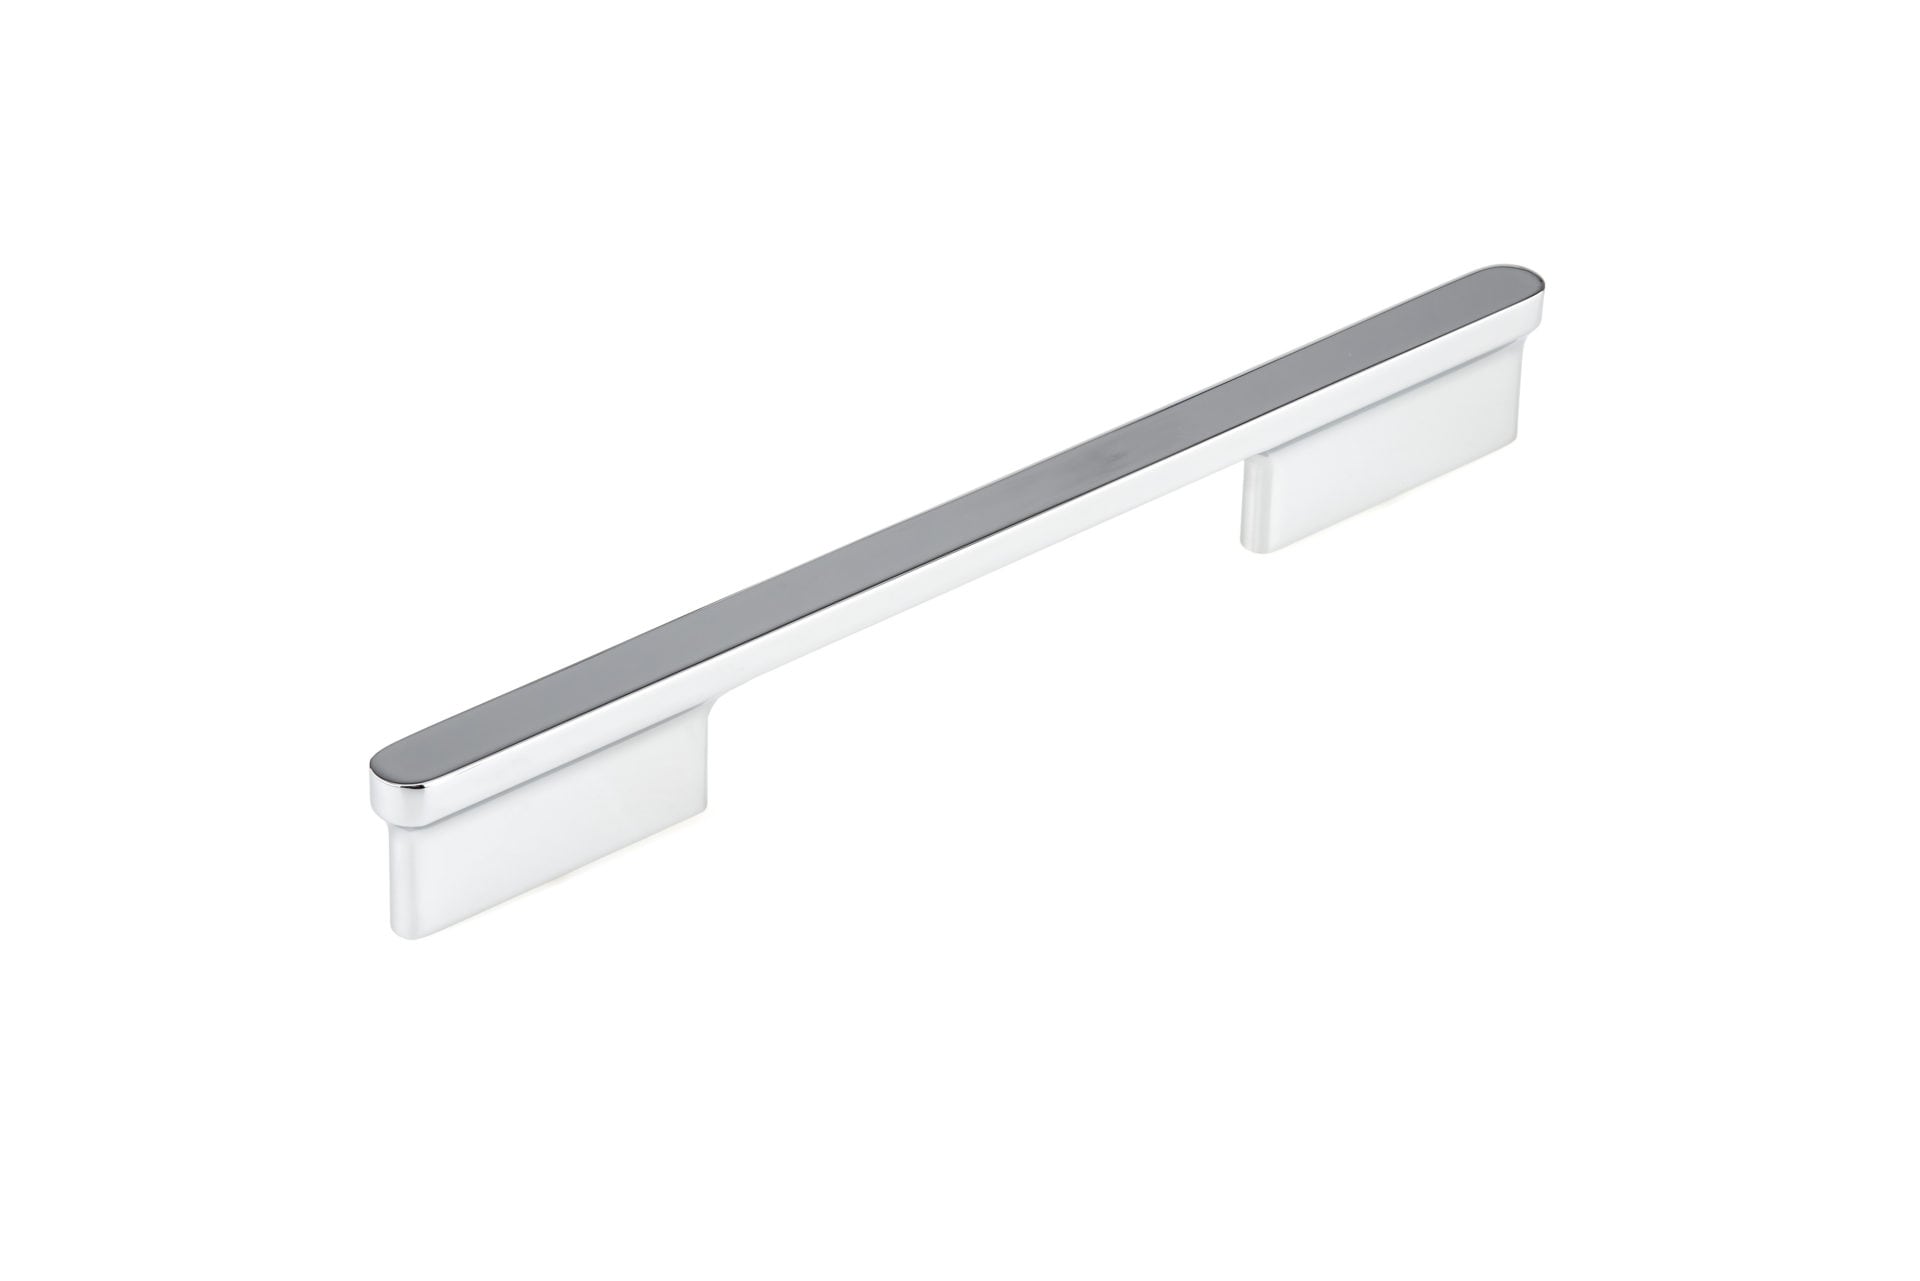 The Naples Cabinet Pull 154 available in Stainless Steel Finish.